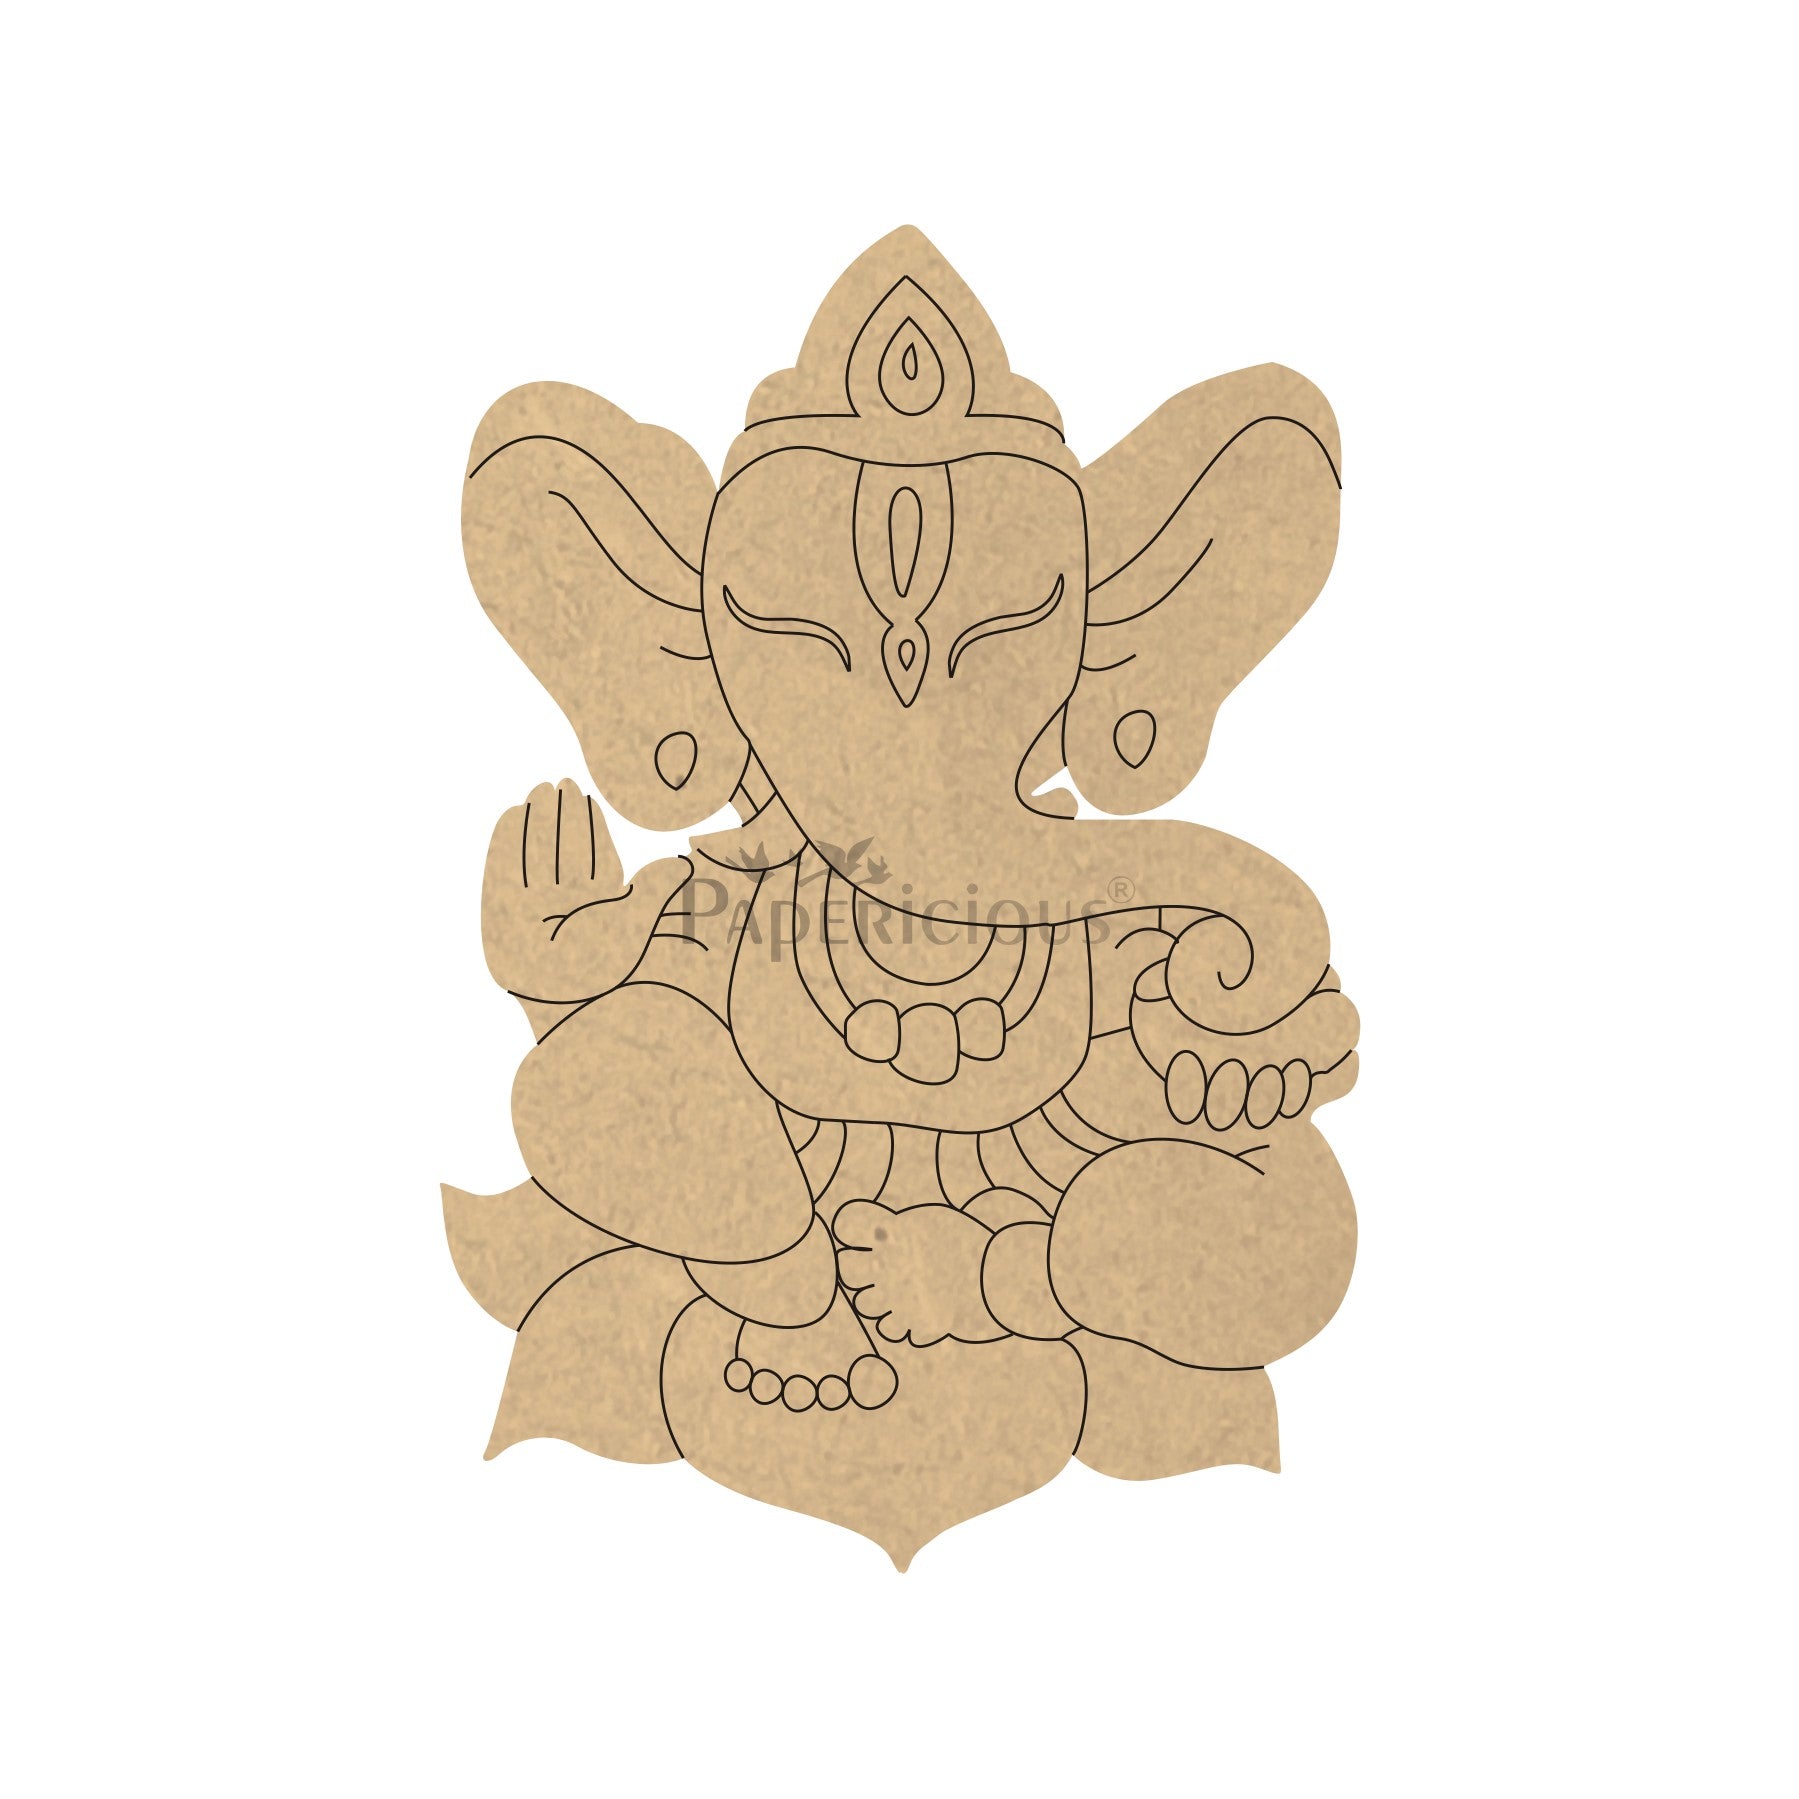 PAPERICIOUS 4mm thick Pre Marked MDF Base Lord Ganesha